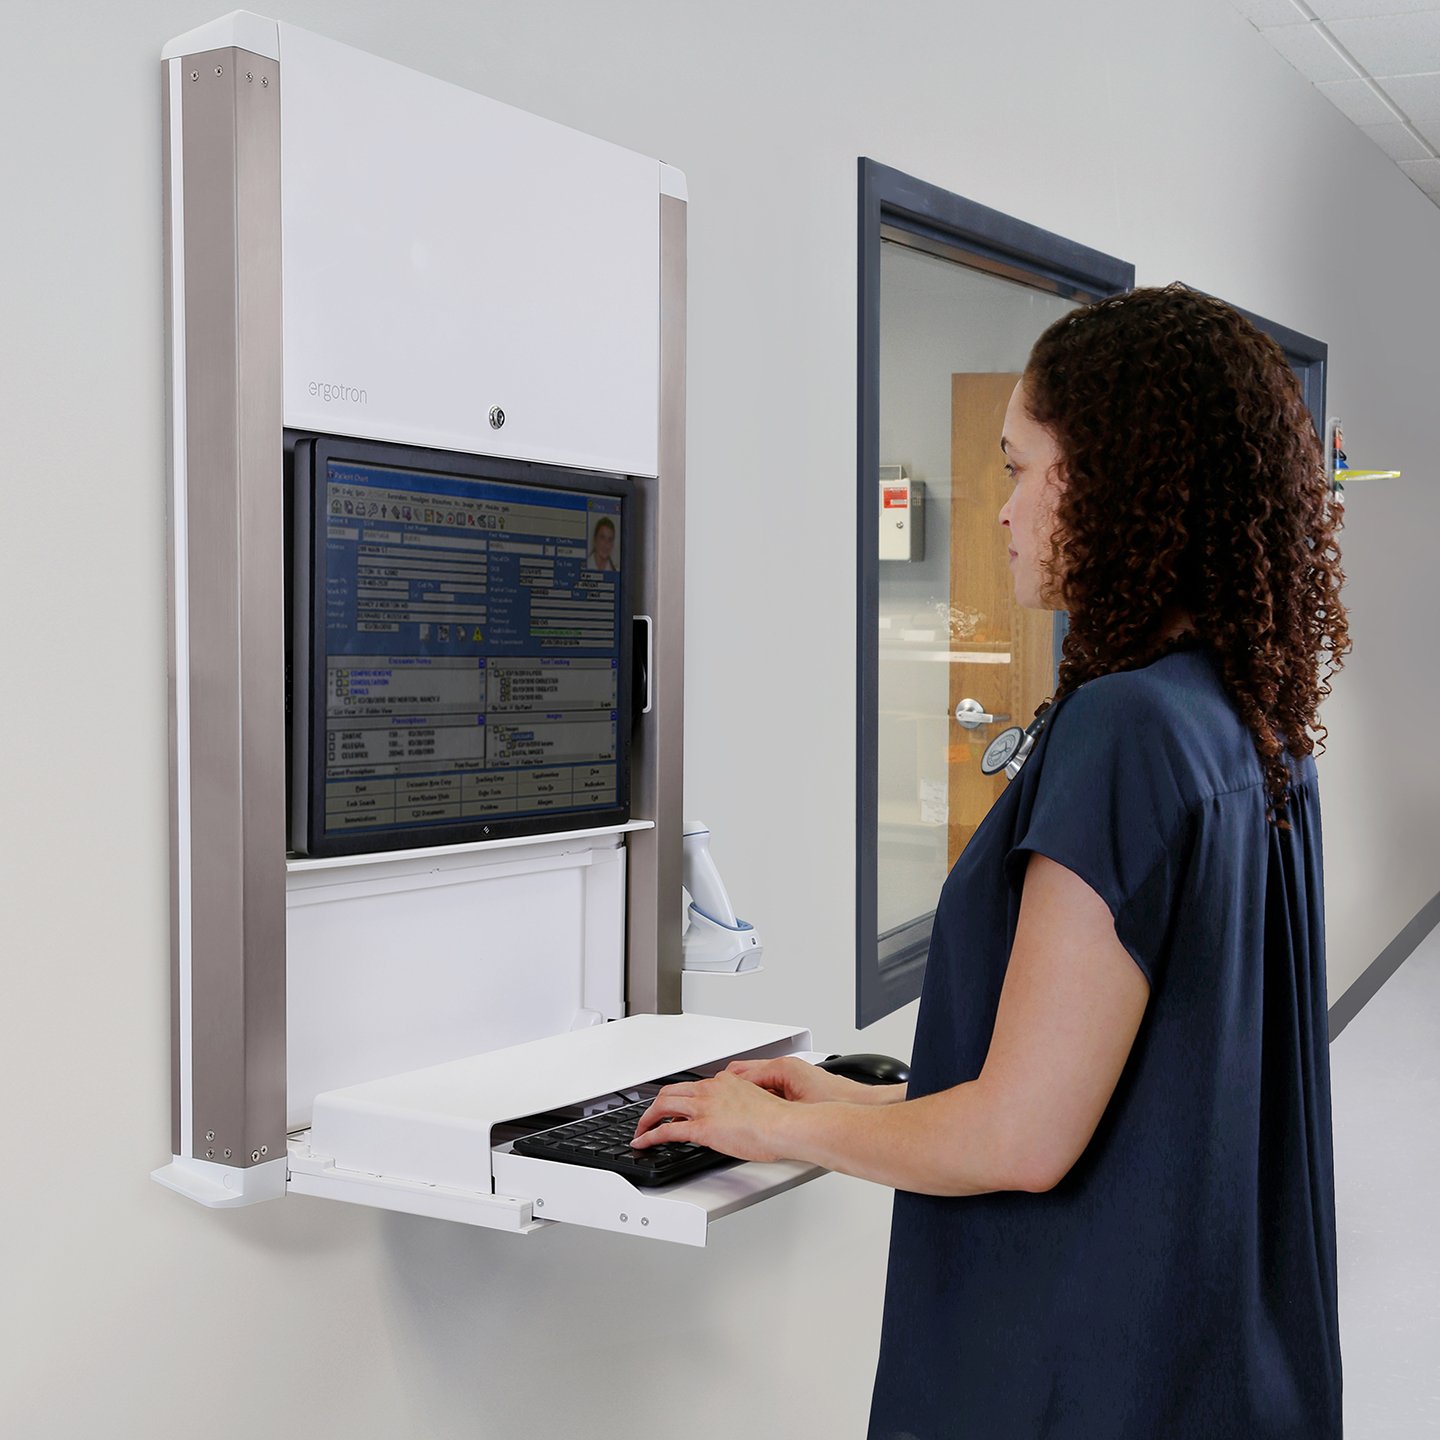 Haworth Carefit Enclosure Workspace in hospital hallway being used by staff in white color